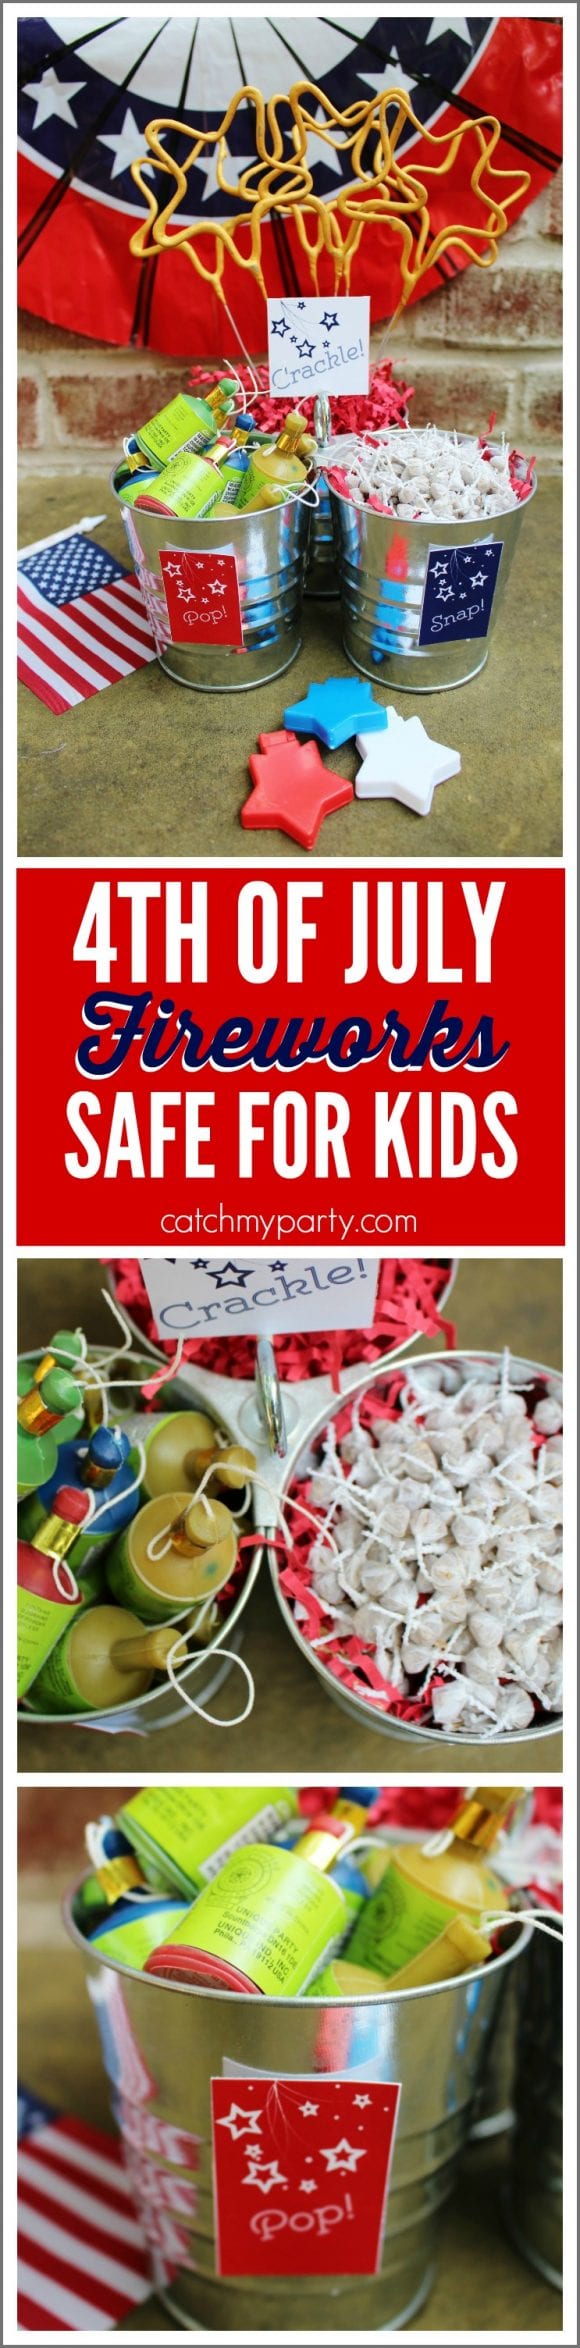 July 4th Kids' Activity That Will Snap, Crackle, and Pop!